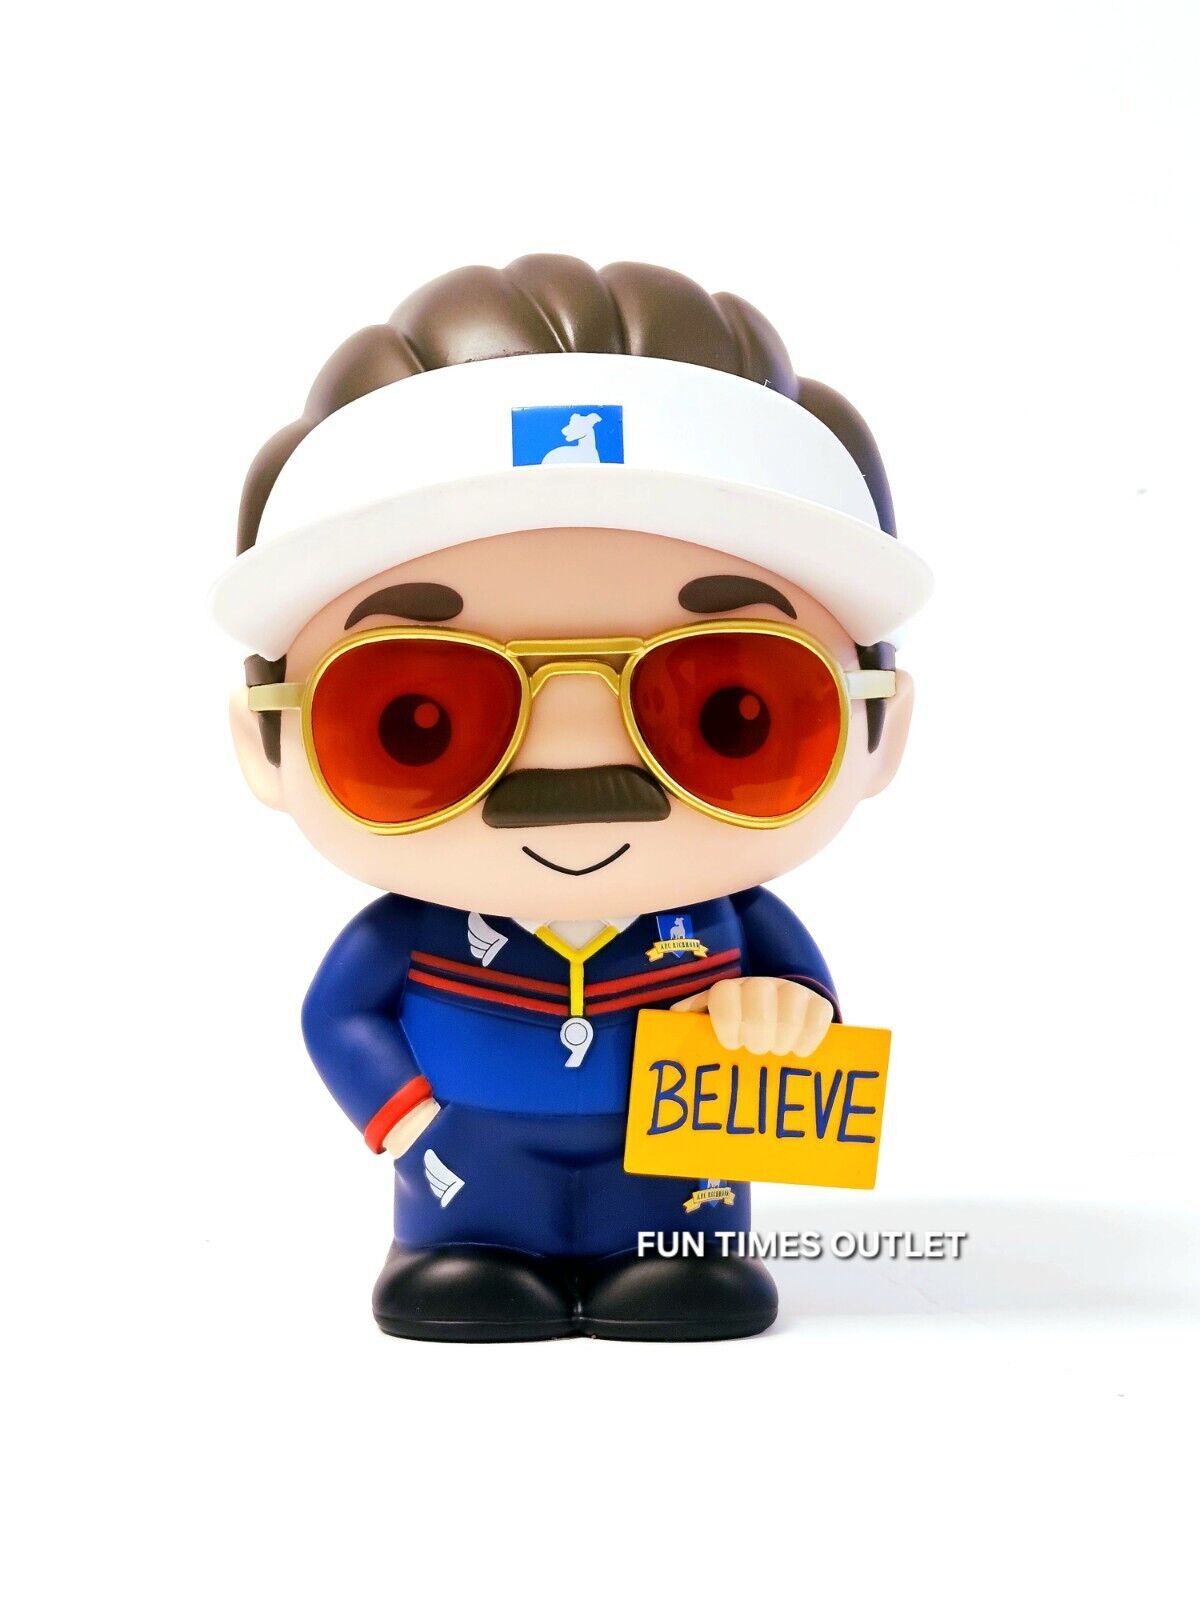 Ted Lasso Believe PVC Figural Bank Coin Piggy Bank by Monogram 8\